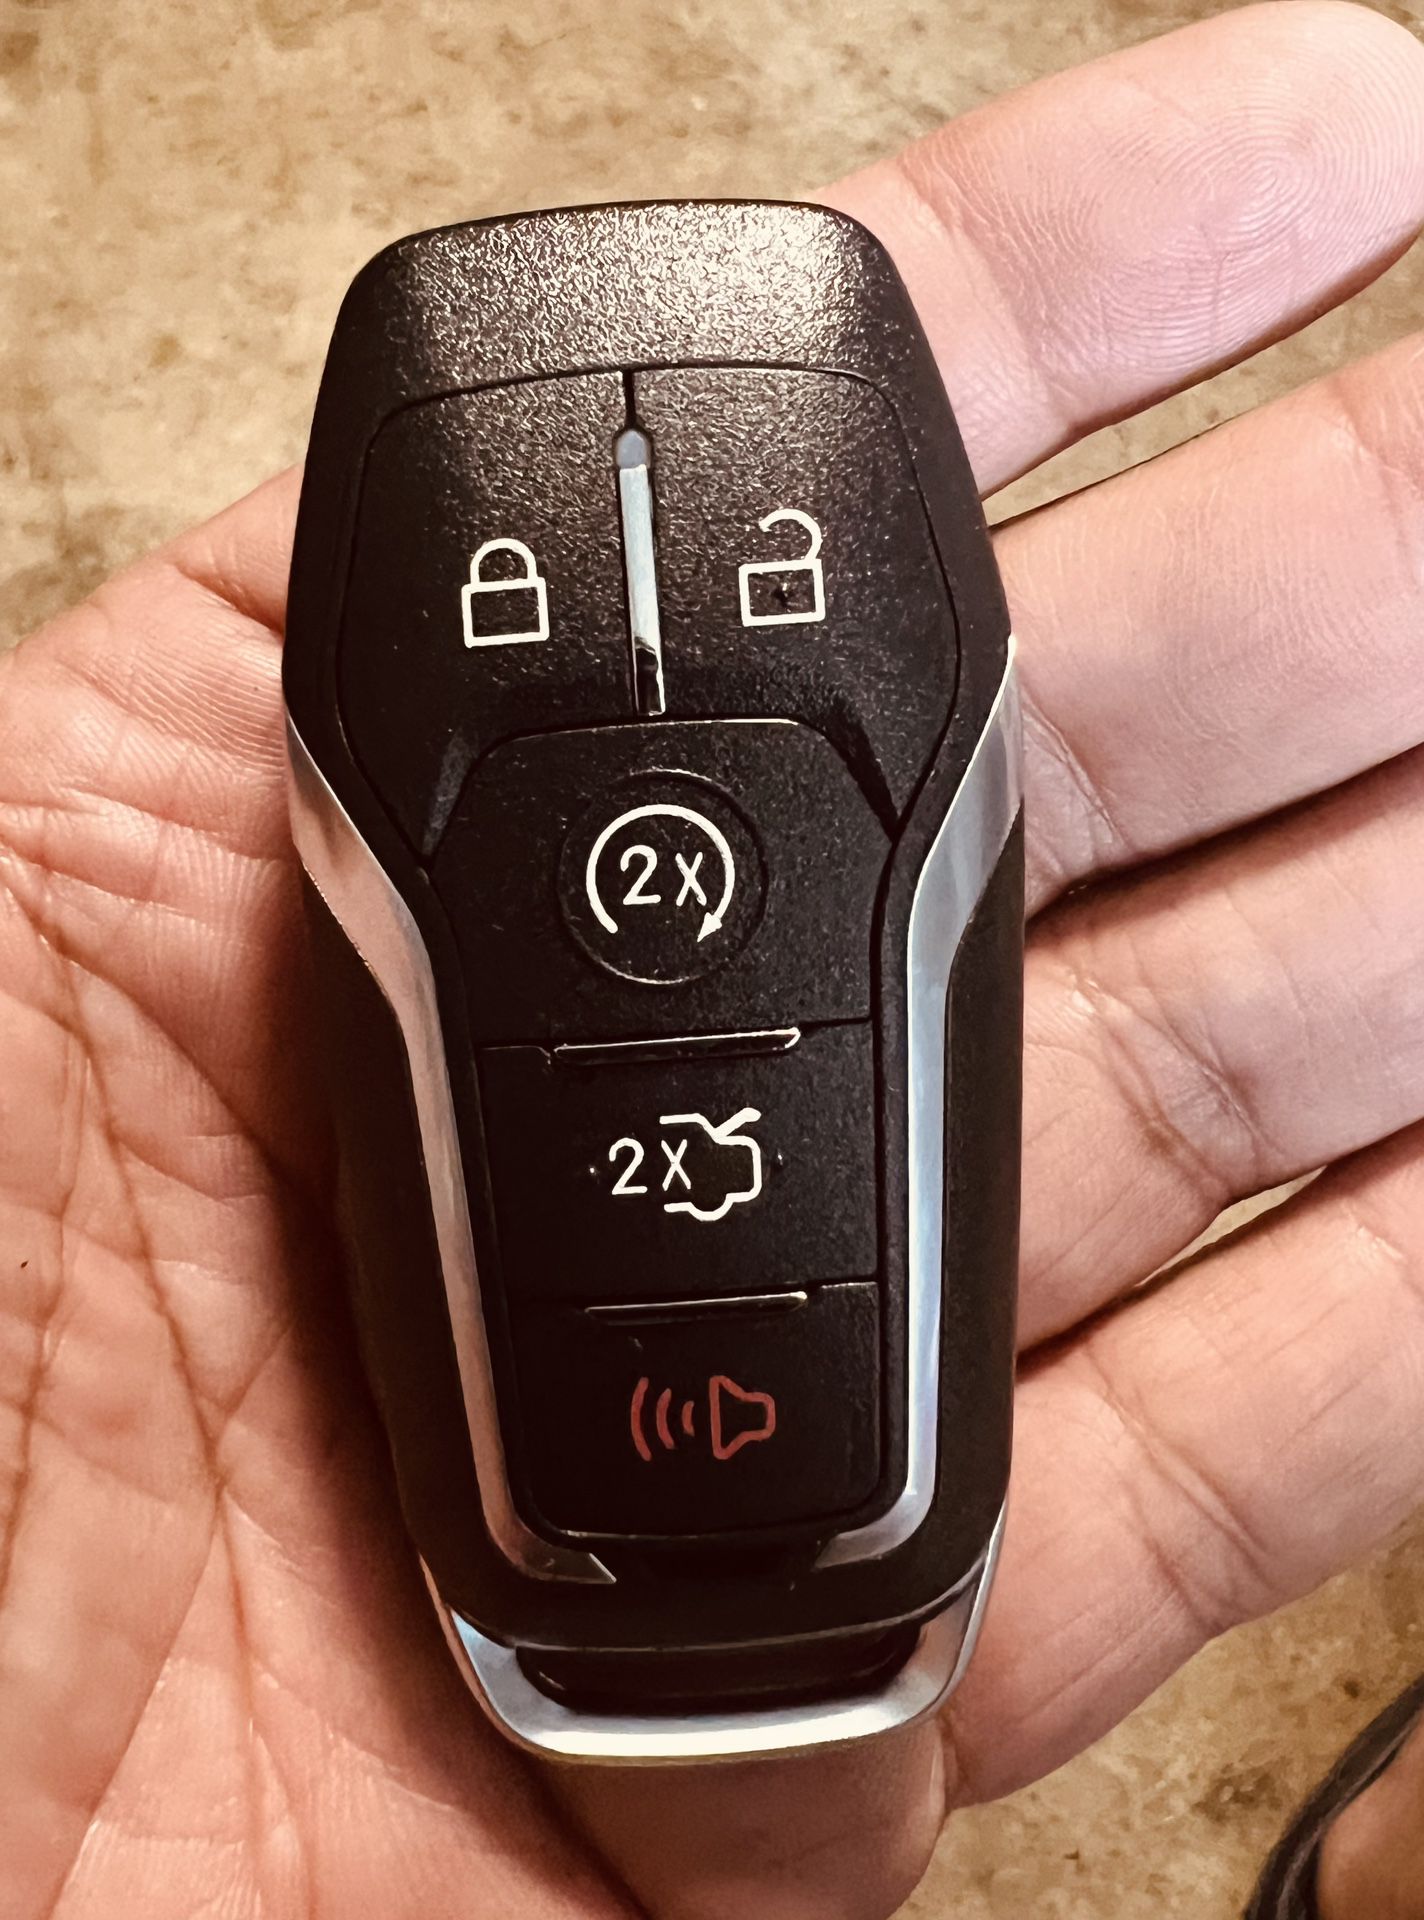 [$119 in Upland Today] 2013-18 Ford Smart Remote Duplicate Copy (Edge, Explorer, Fusion, Mustang, F150 & more)